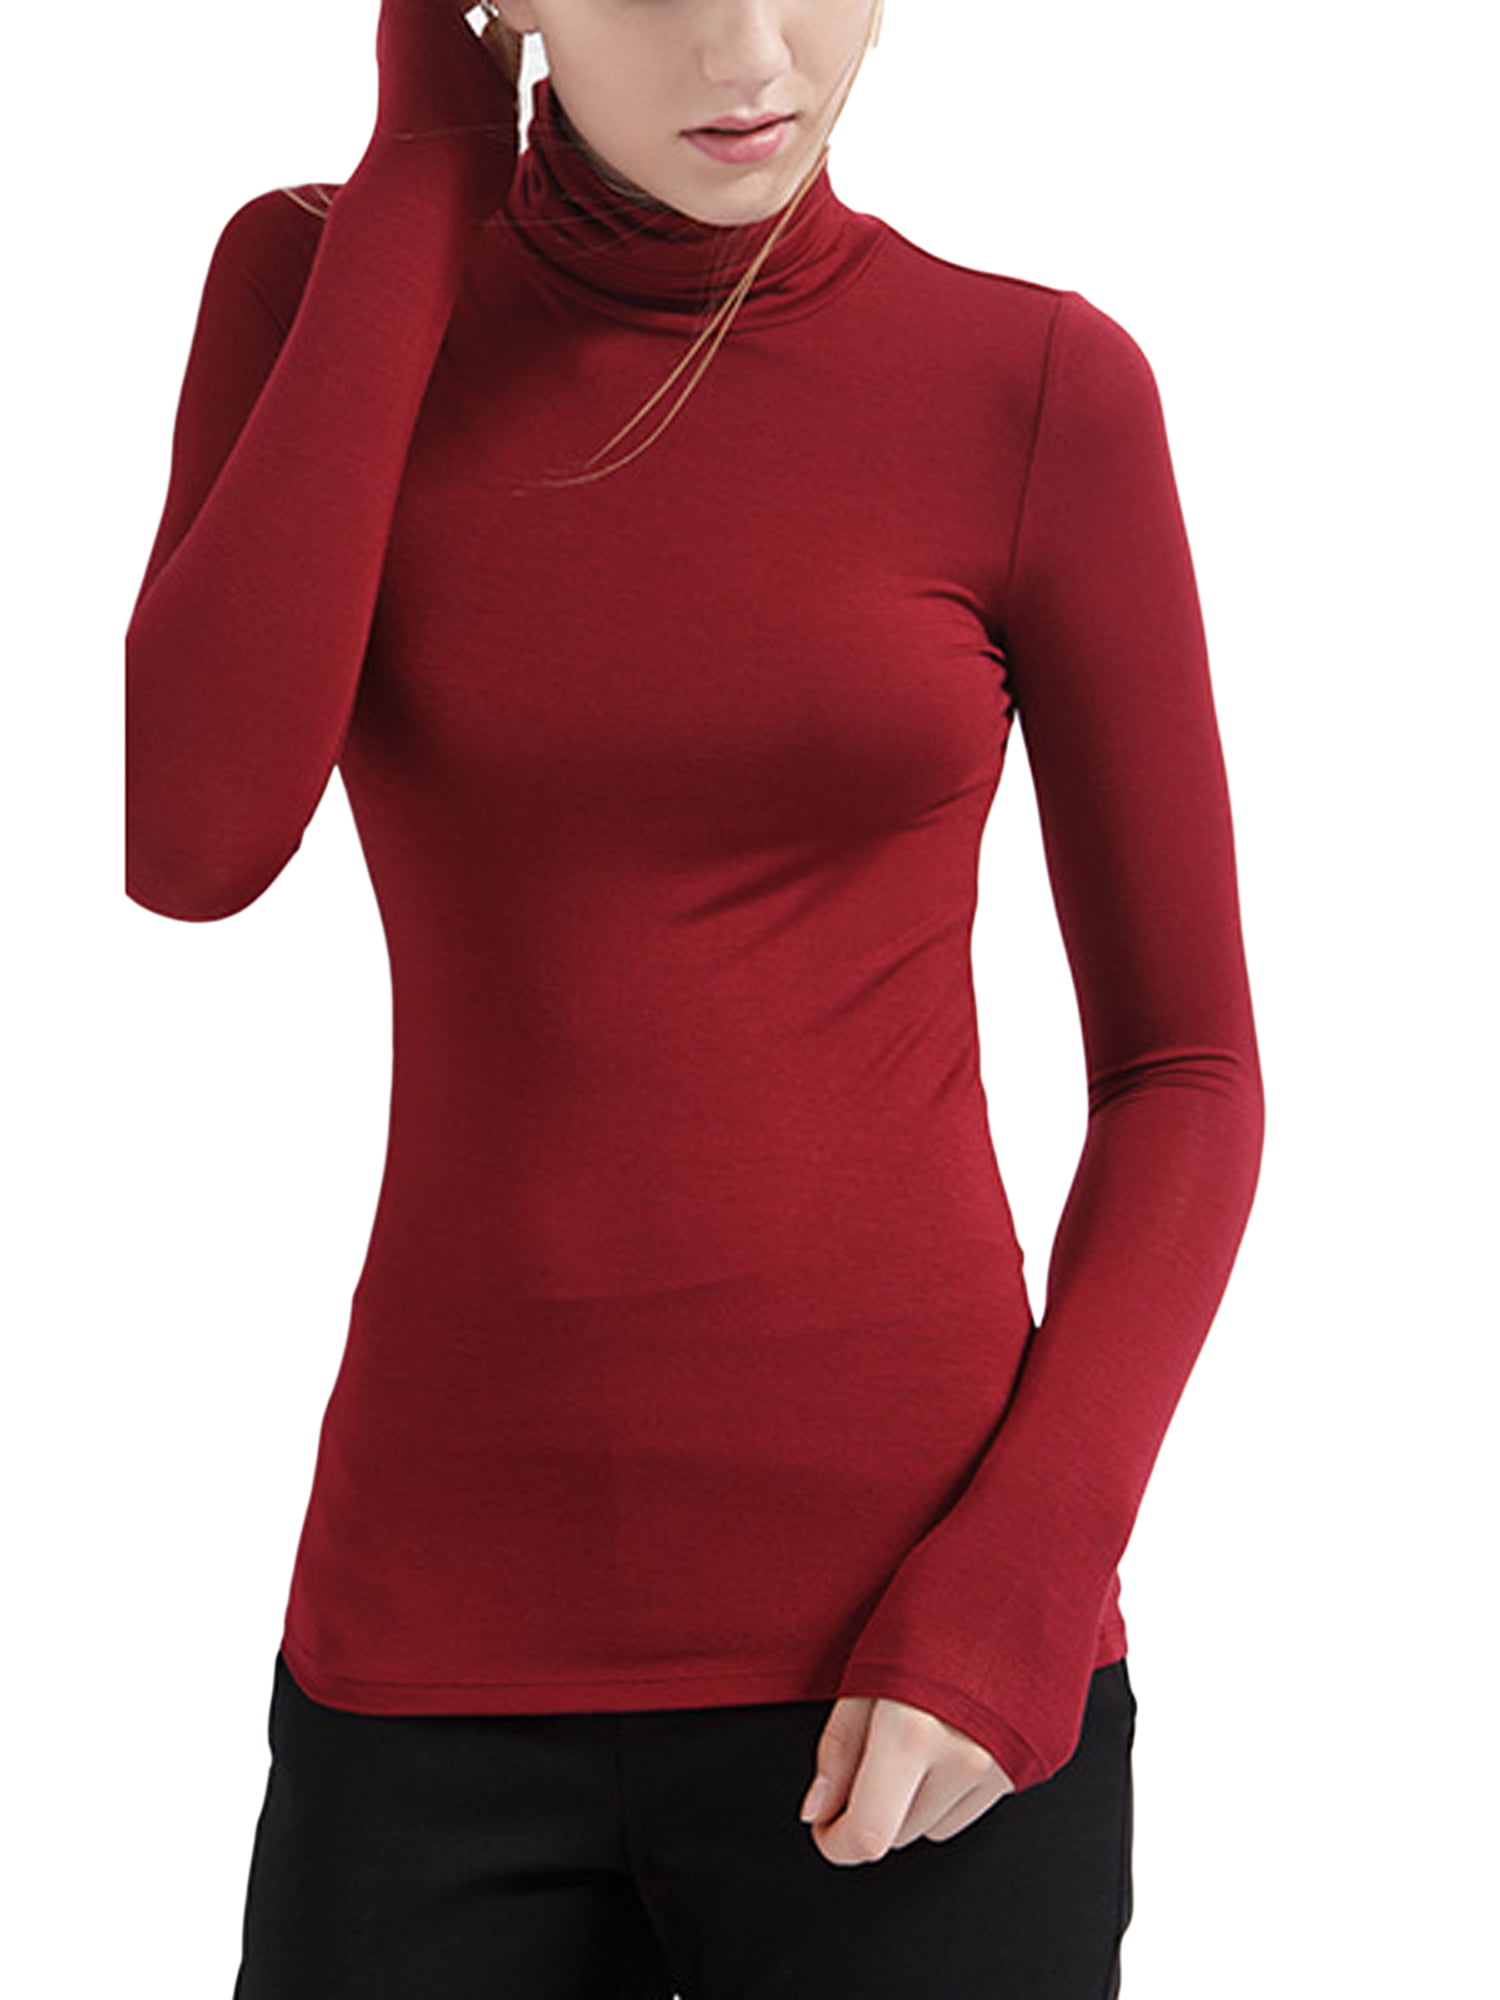 Sleeve Turtleneck Tops Stretchy Fitted Base Slim Base Soft Long Pullover, Shirts Layer Women\'s Modal Musuos